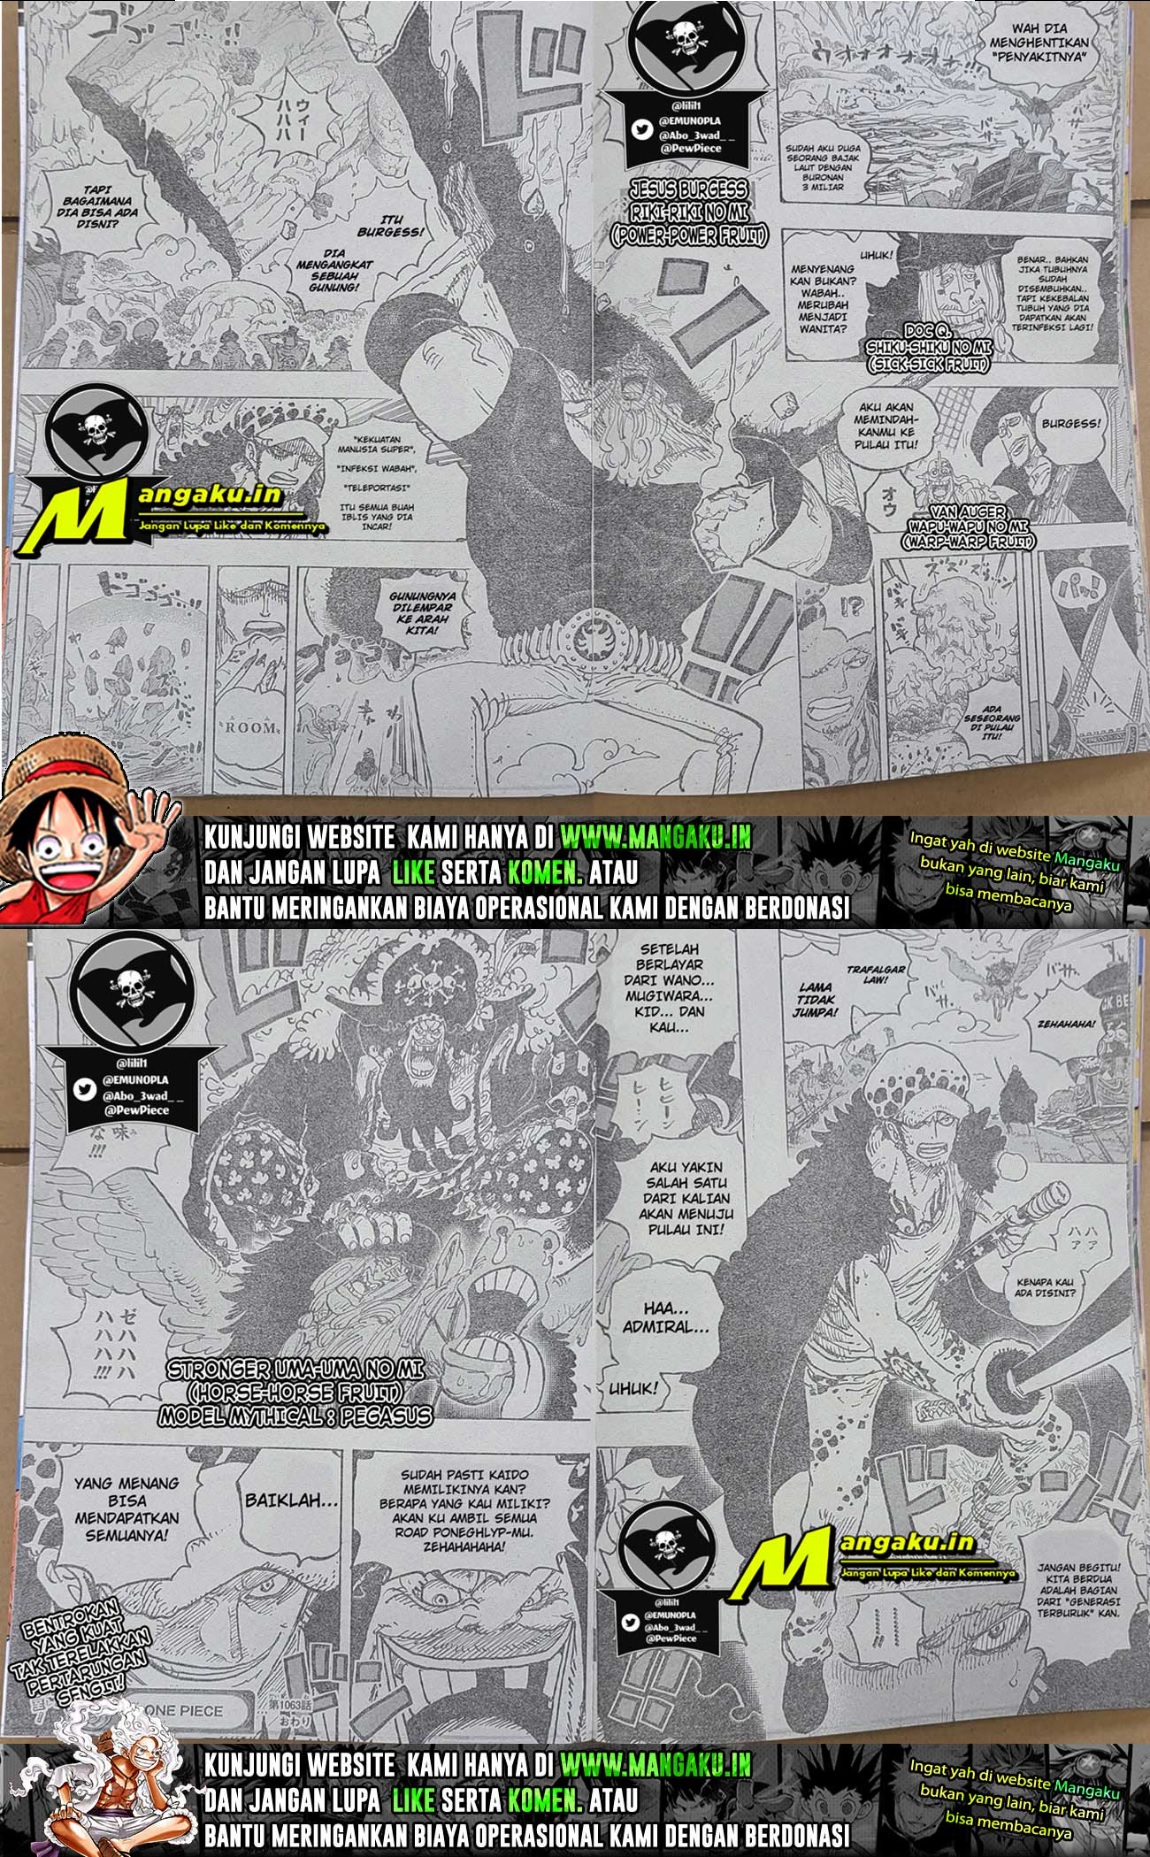 One Piece Chapter 1063 lq